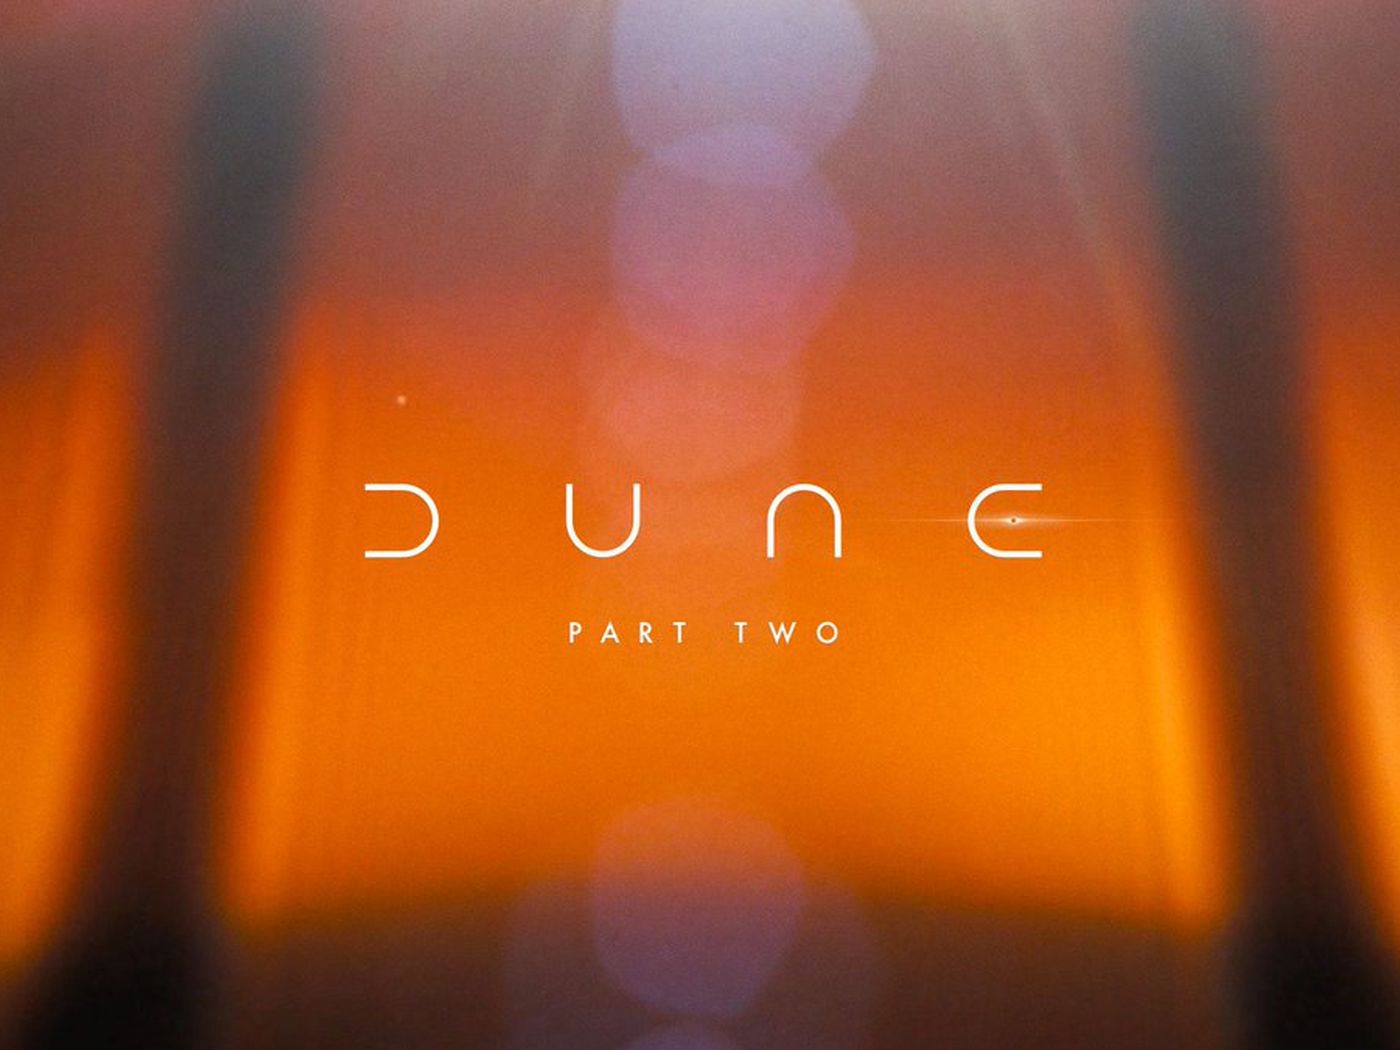 Dune: Part Two is officially happening to adapt the other half of the book